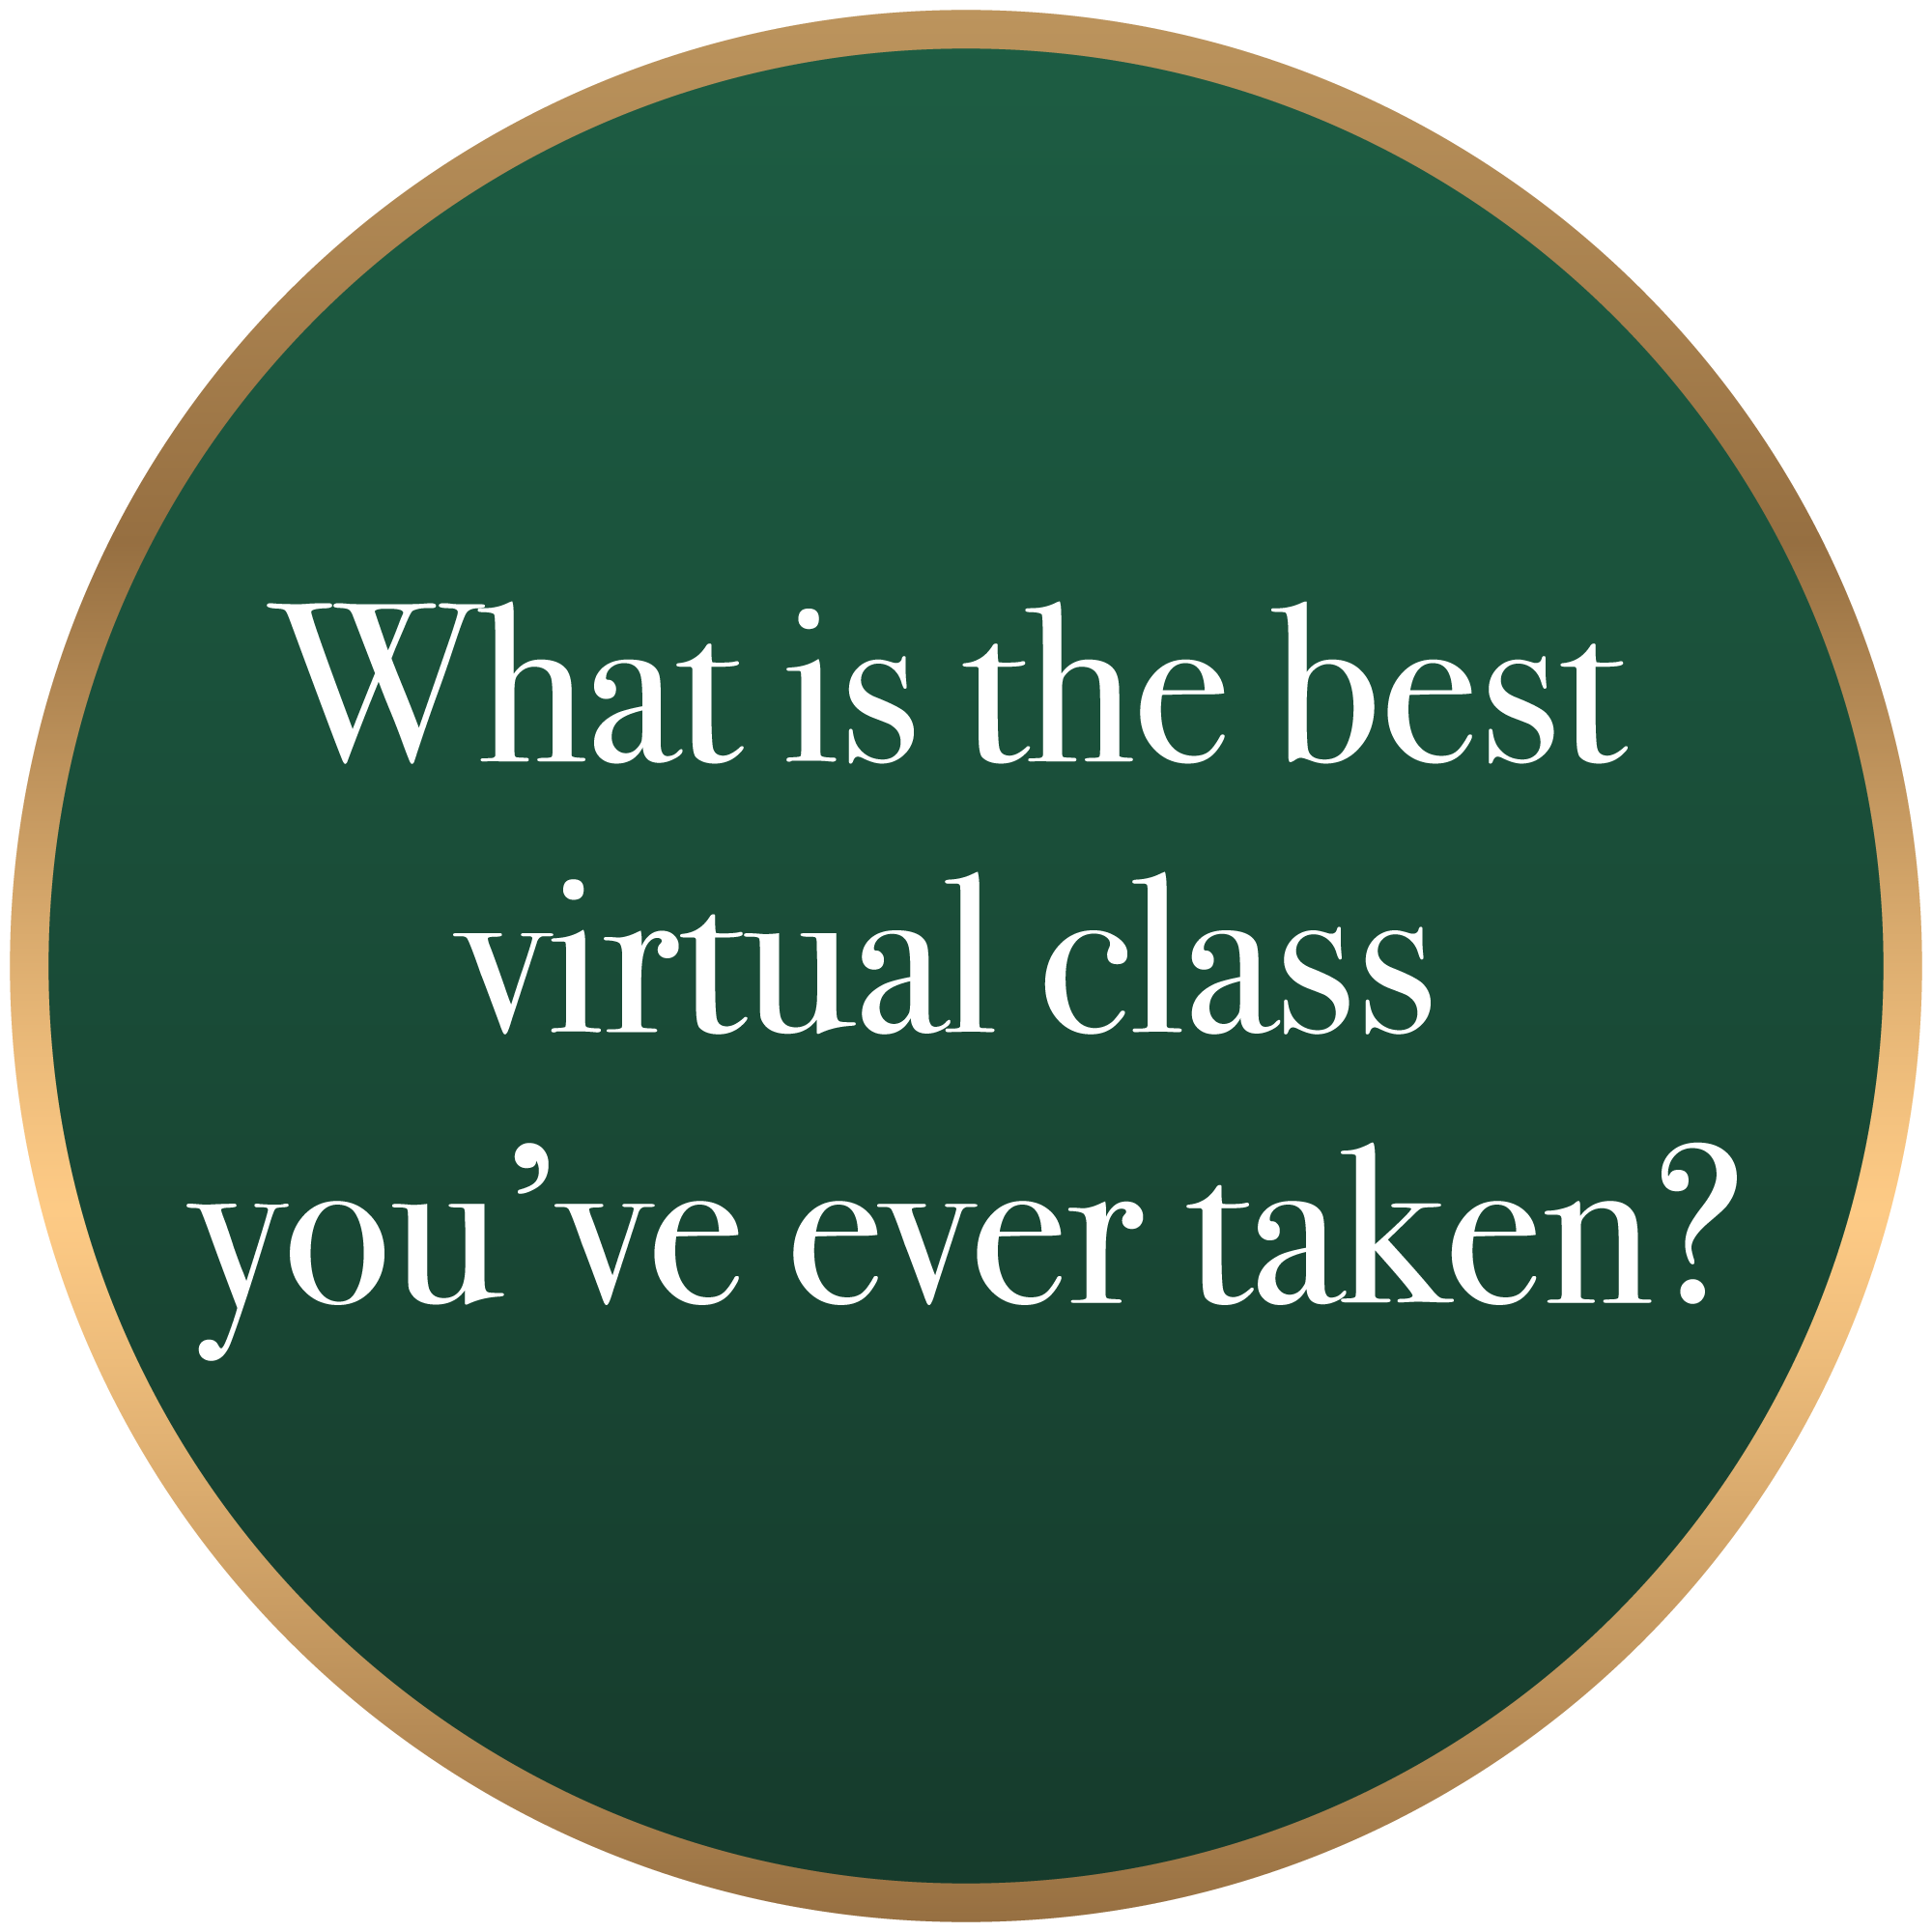 What is the best virtual class you've ever taken?